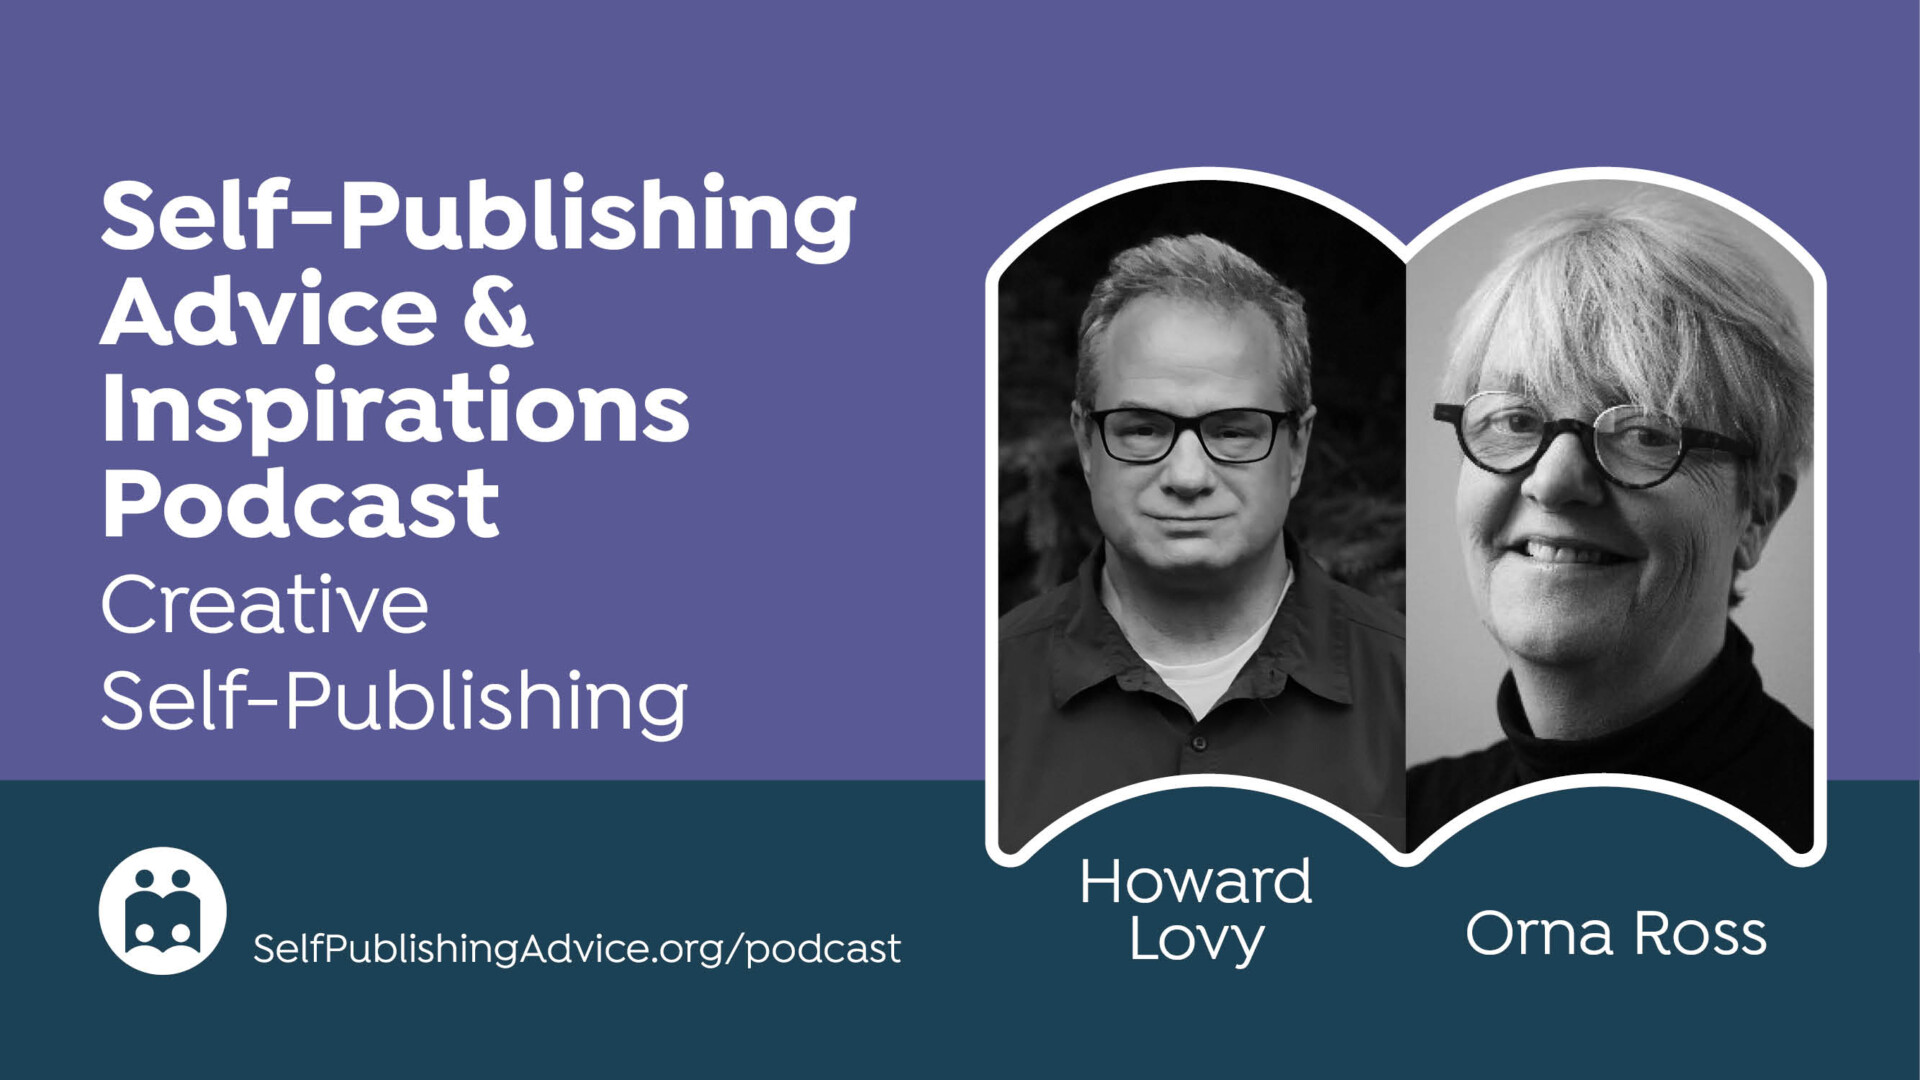 Using Creative Play To Improve Your Work: Creative Self-Publishing Podcast With Orna Ross And Howard Lovy